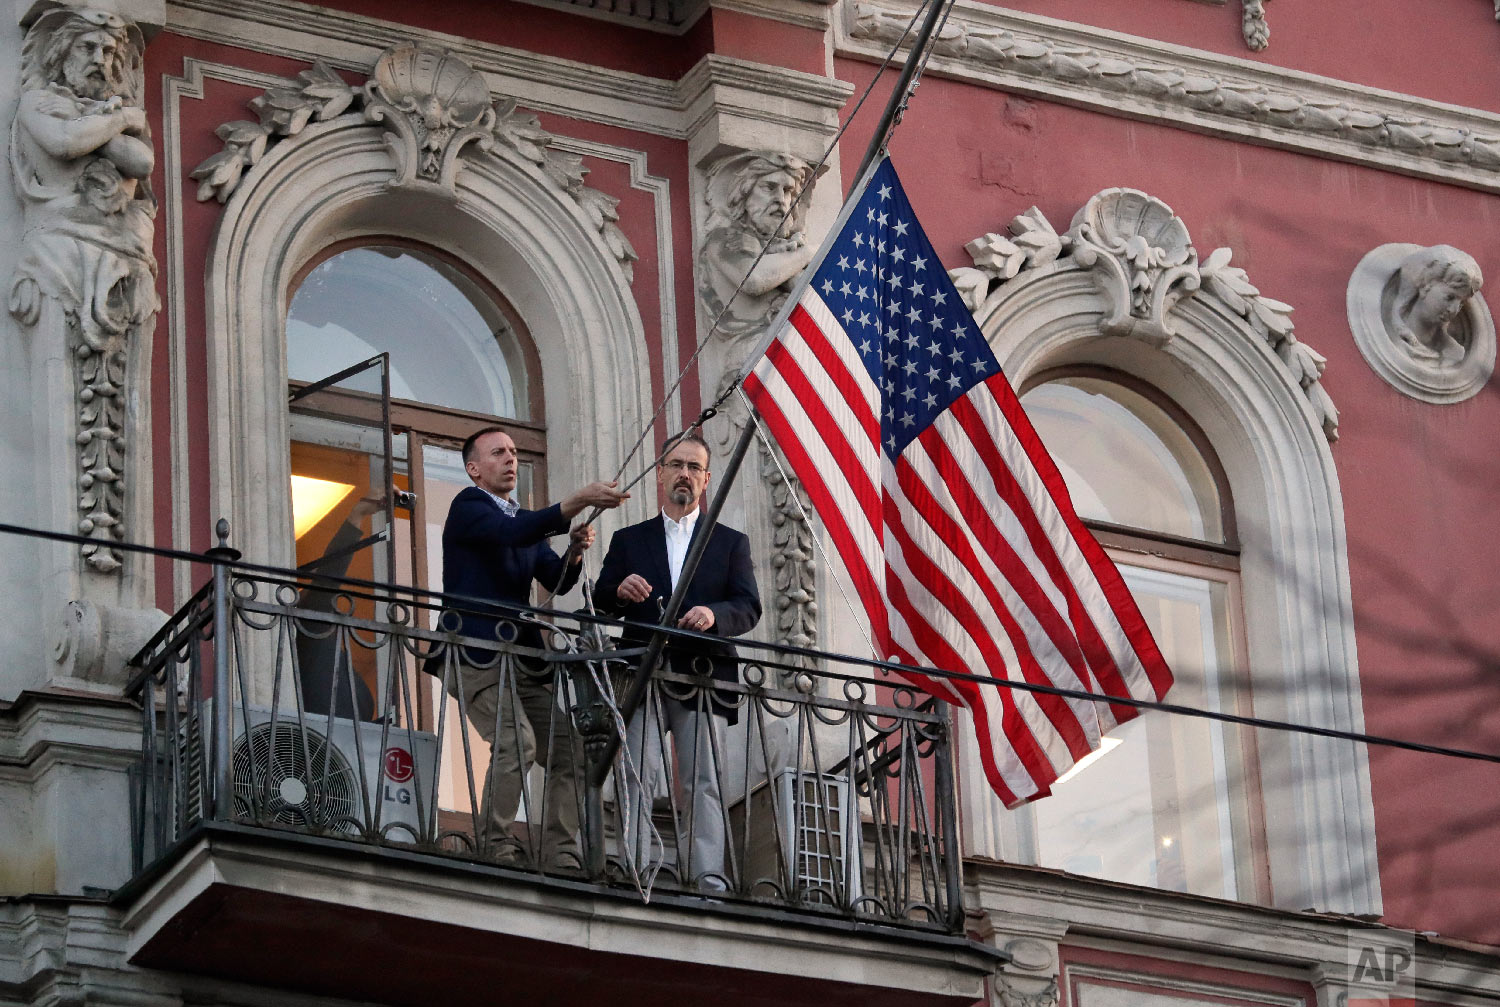  Employees at the U.S. consulate in St. Petersburg, Russia, remove the U.S flag on March 31, 2018, after Russia announced it was closing the consulate and expelling more than 150 diplomats, including 60 Americans. The move was in retaliation for the 